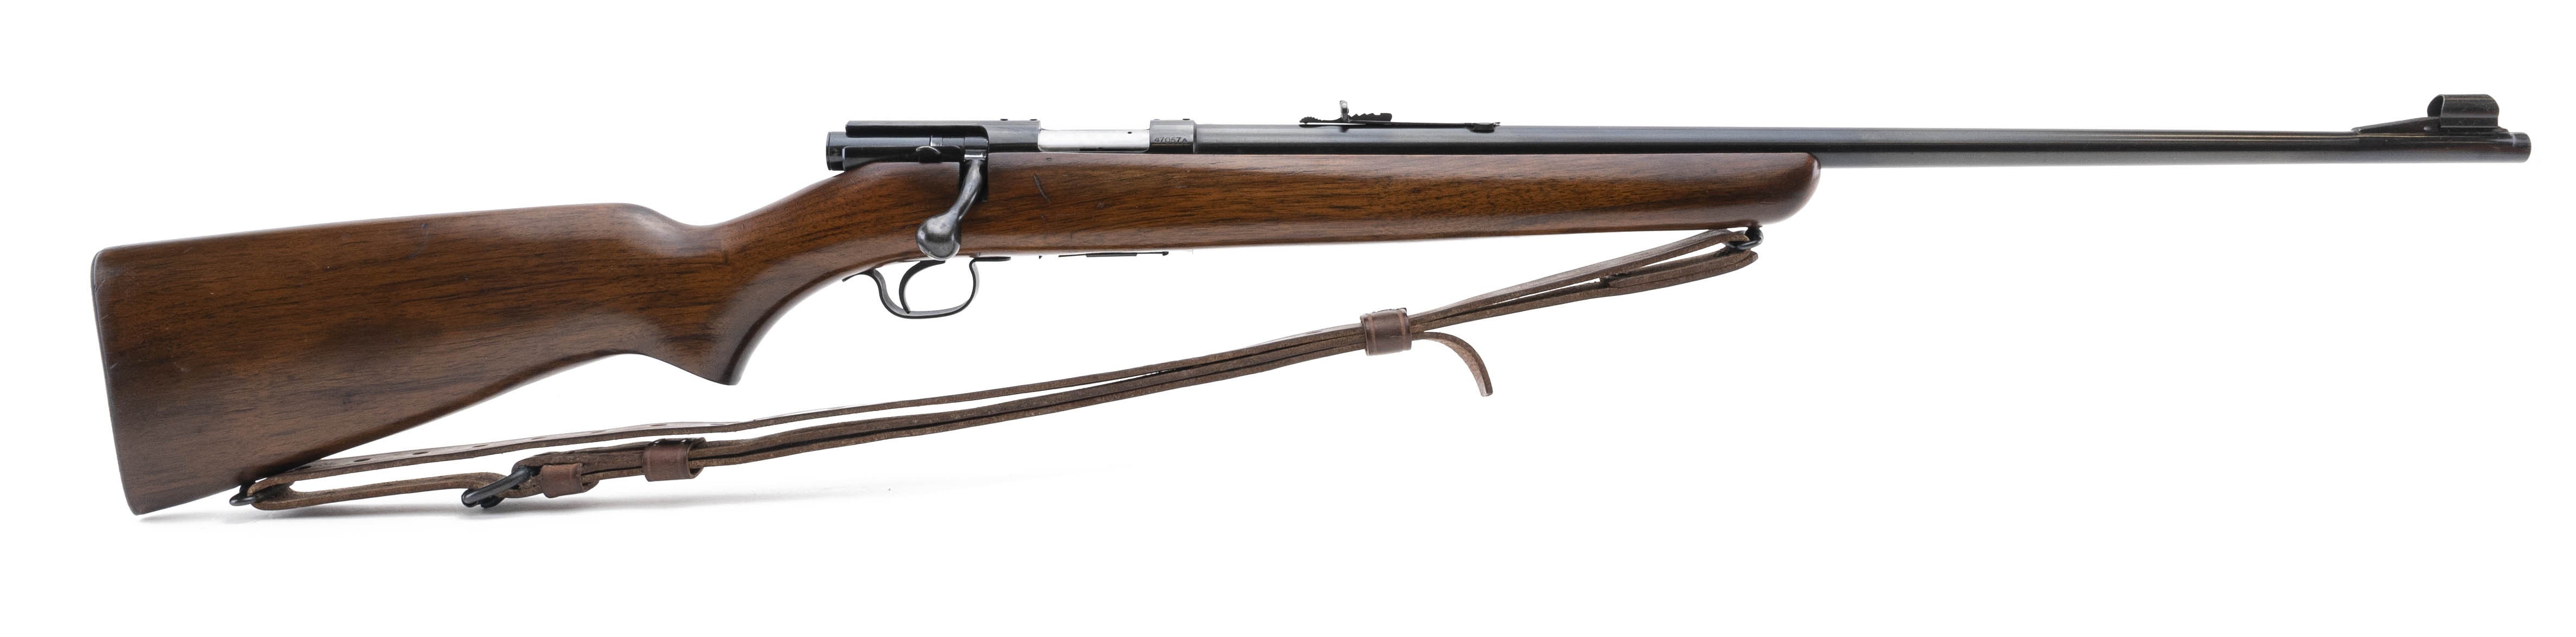 Winchester 43 22 Hornet caliber rifle for sale.